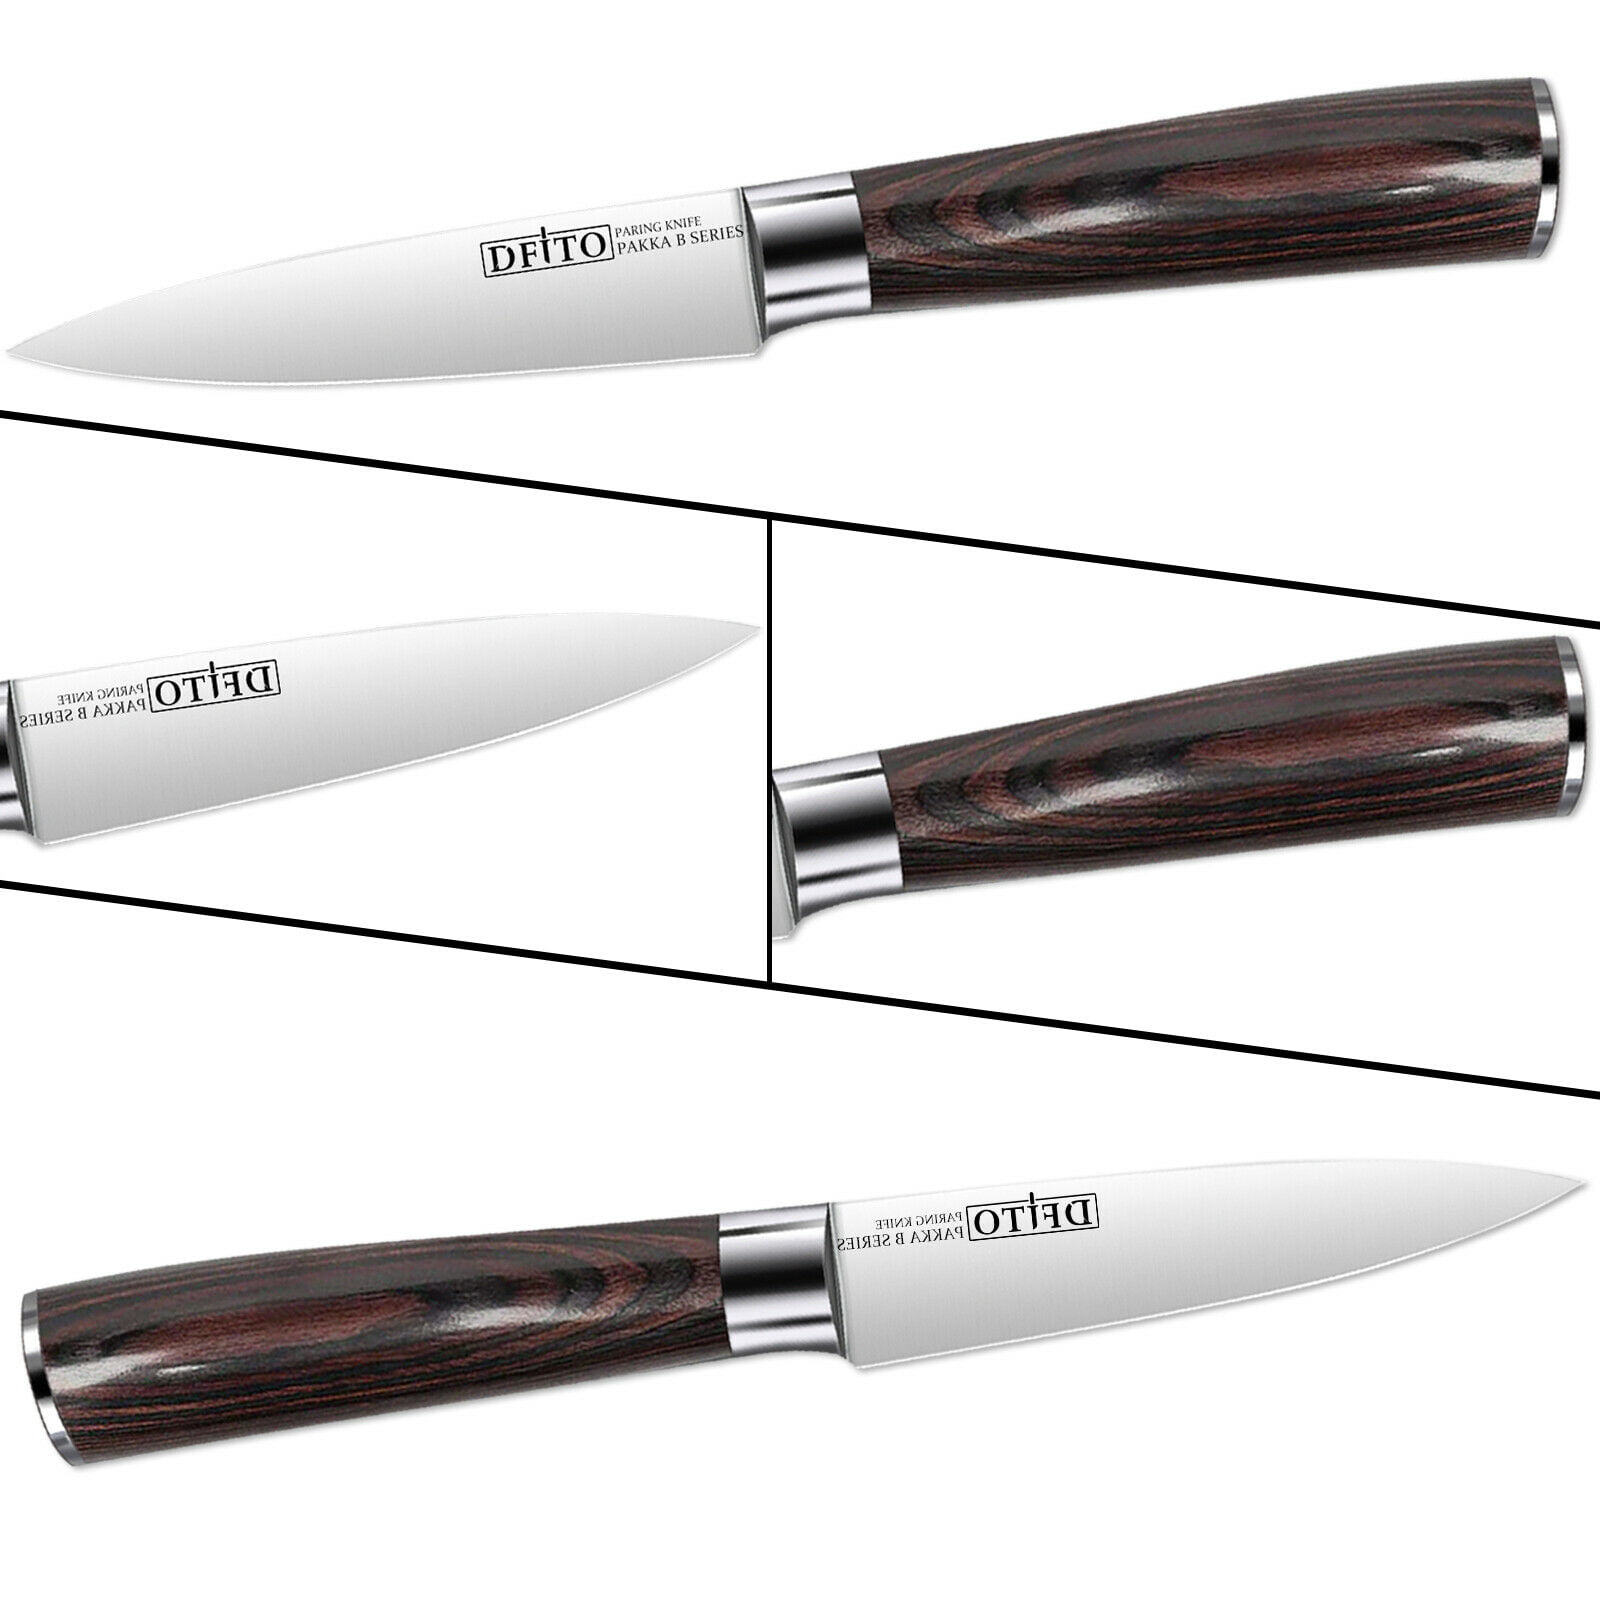 OAKSWARE Paring Knife, 4 inch Small Kitchen Knife Ultra Sharp German  Stainless Steel Fruit and Vegetable Cutting Chopping Knives - Full Tang  Ergonomic